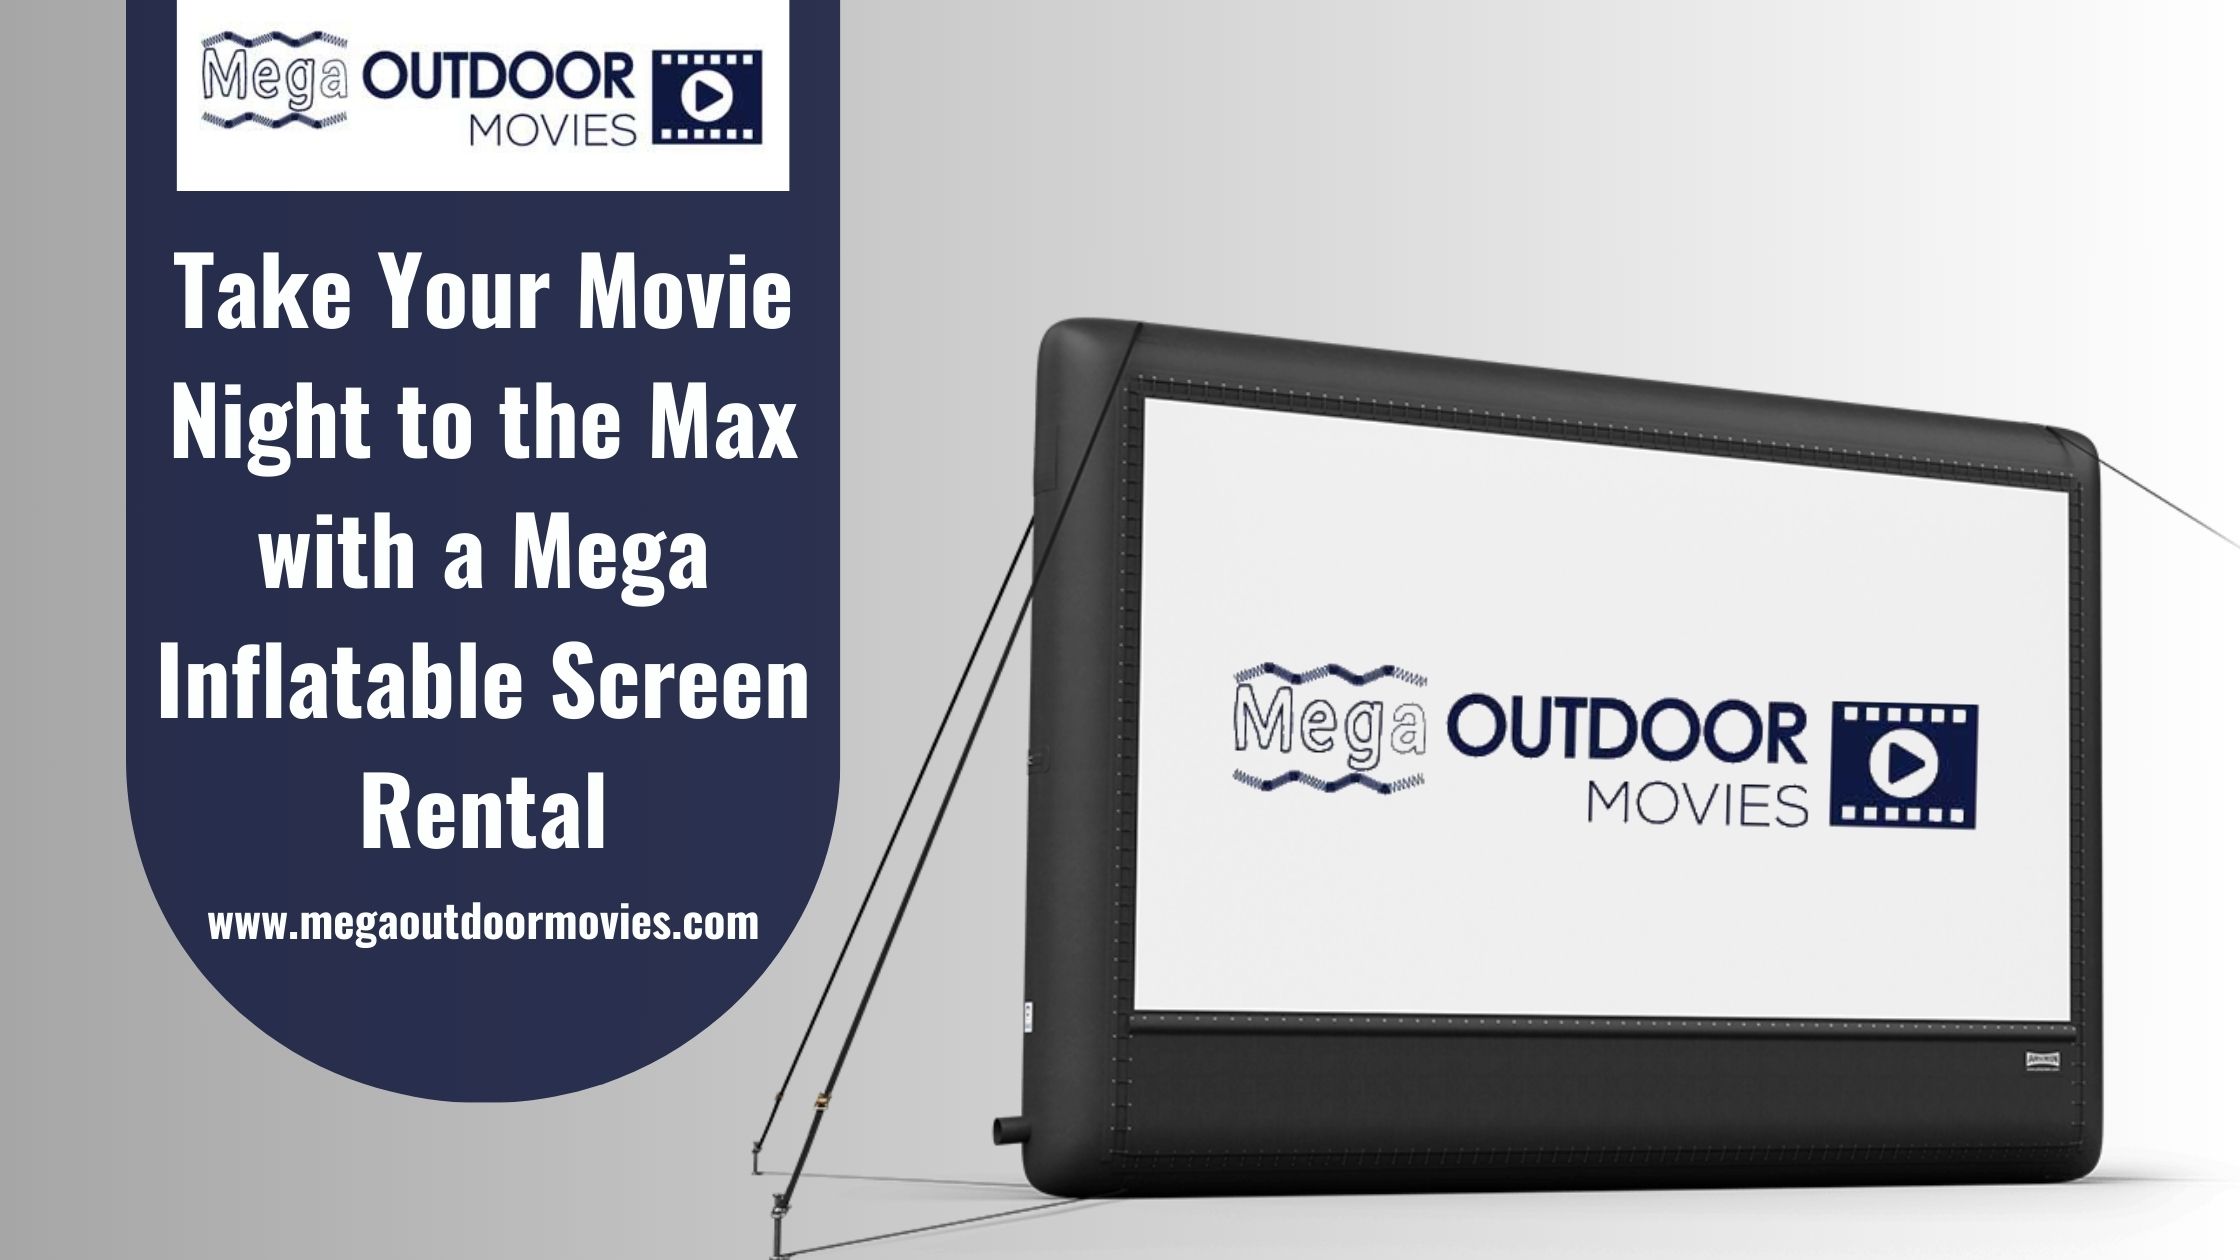 Take Your Movie Night to the Max with a Mega Inflatable Screen Rental